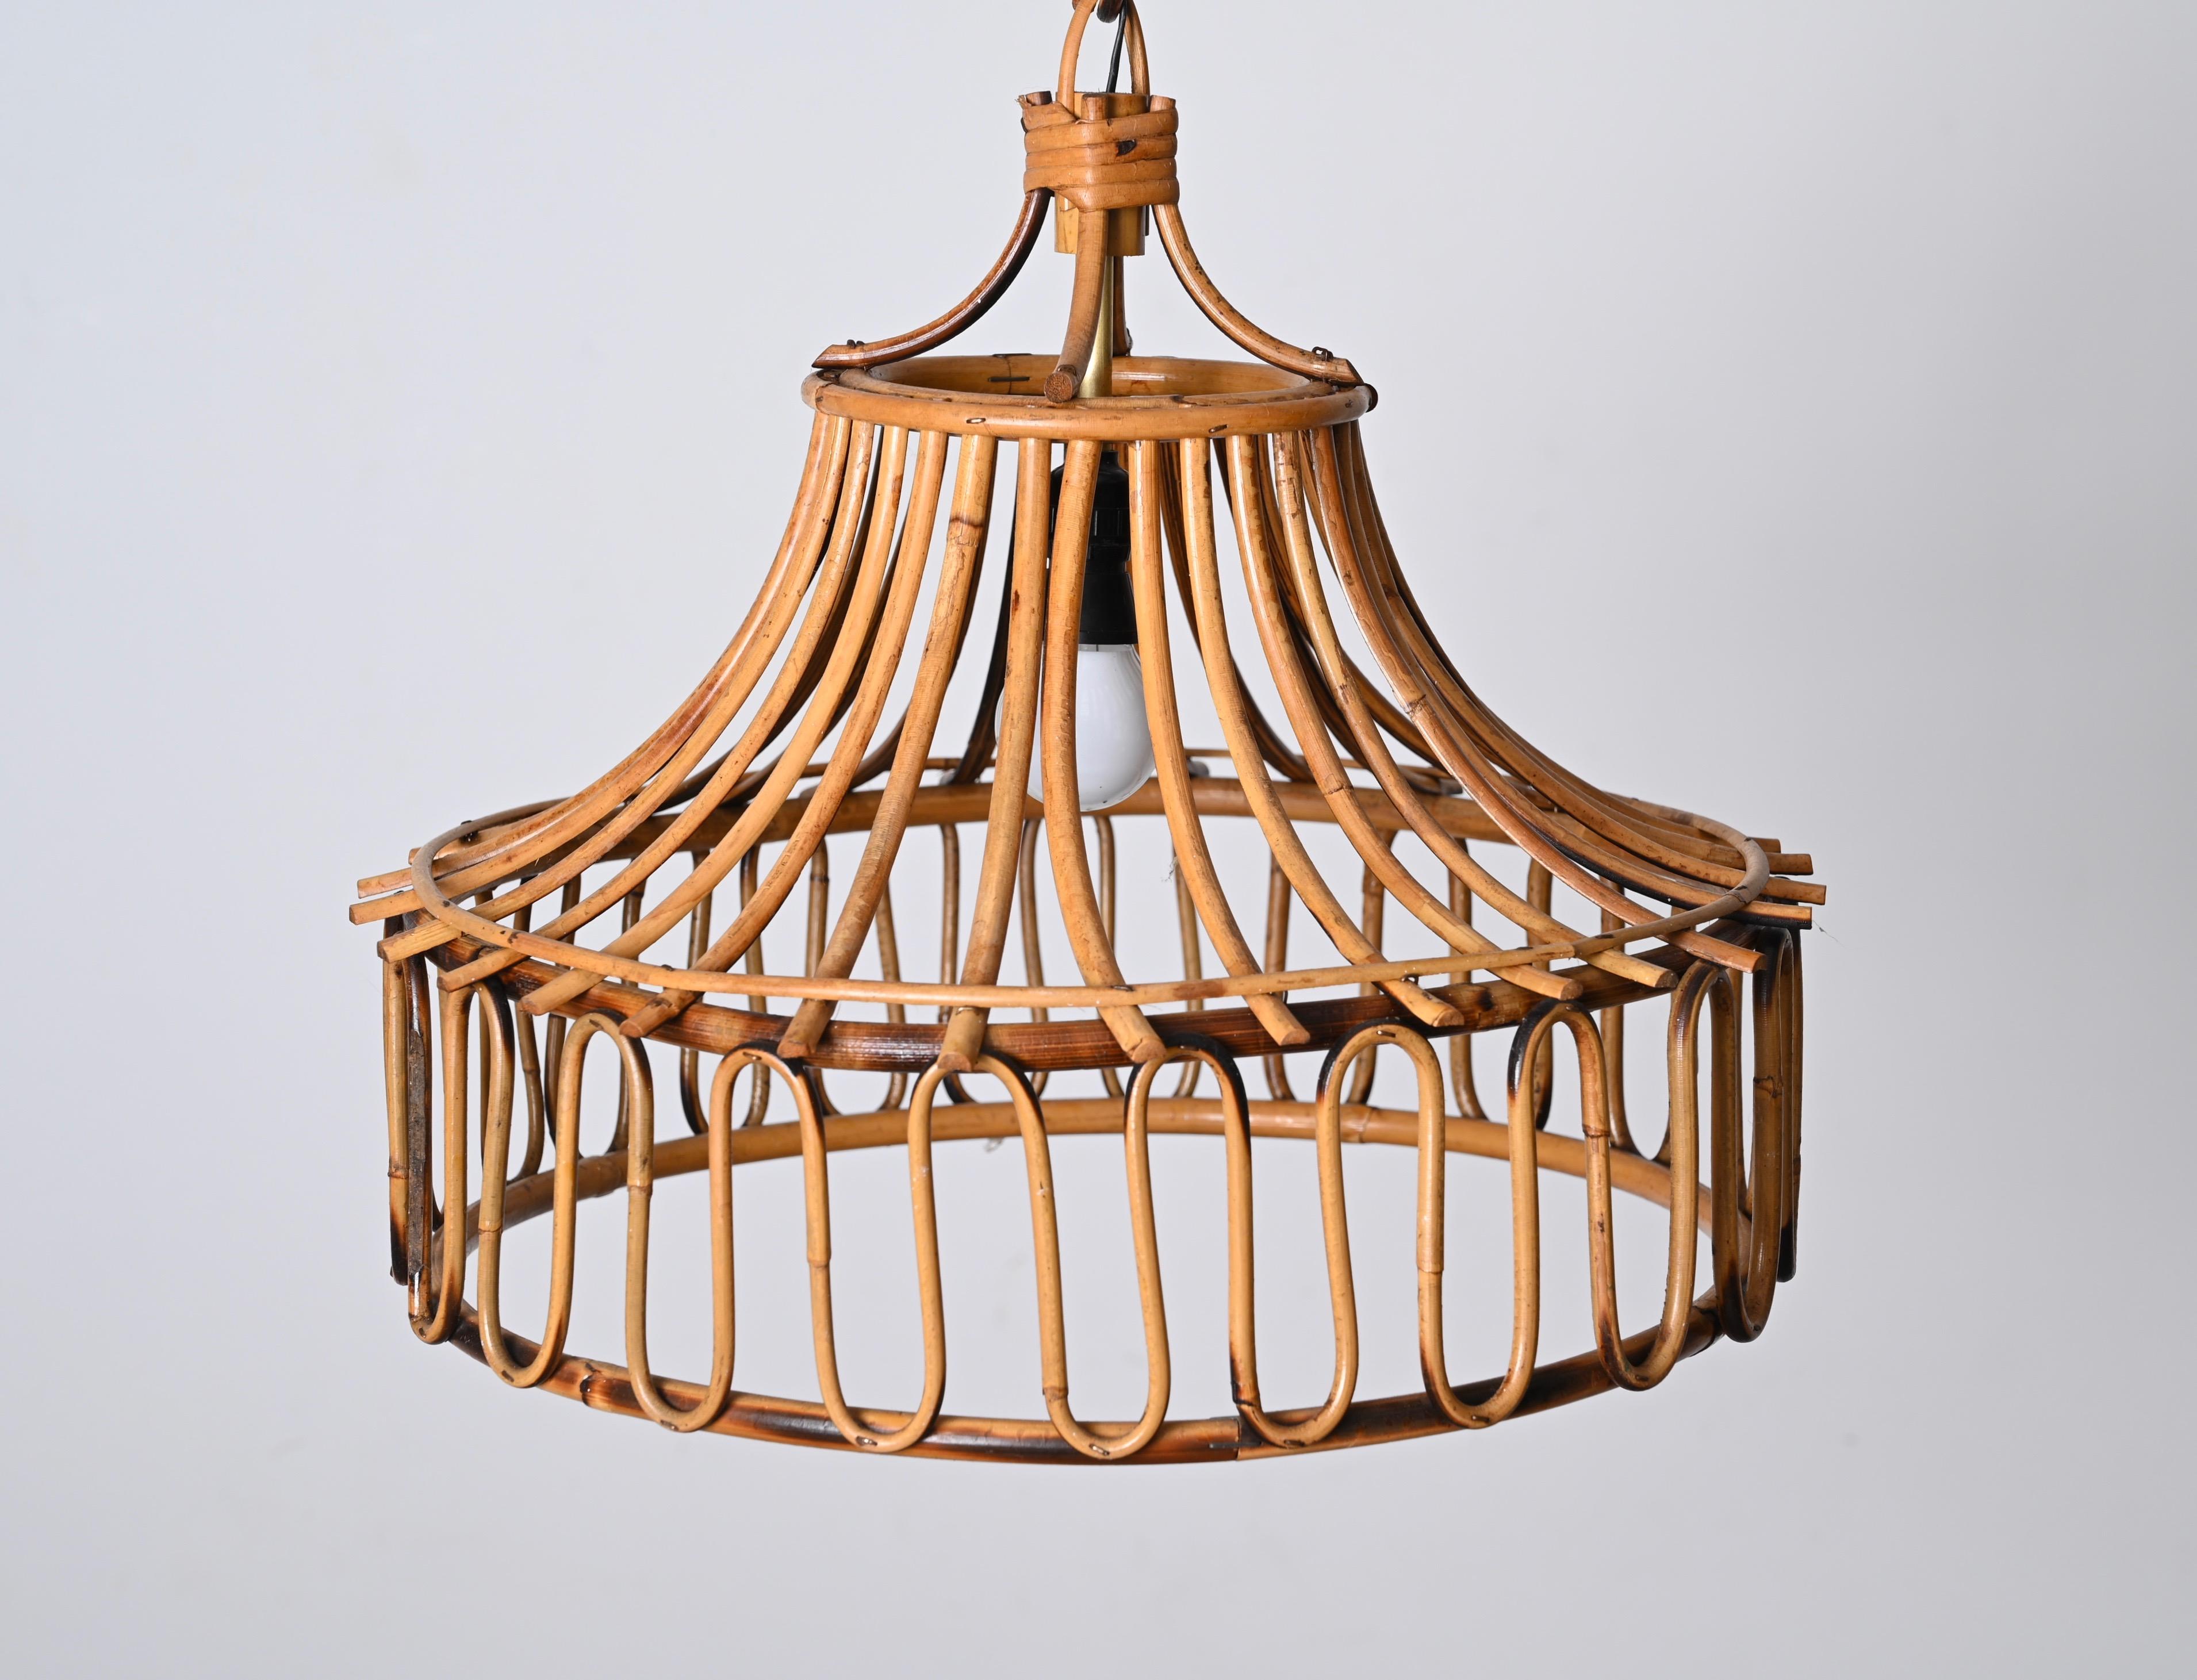 Midcentury French Riviera Bambo and Rattan Round Italian Chandelier, 1960s For Sale 1